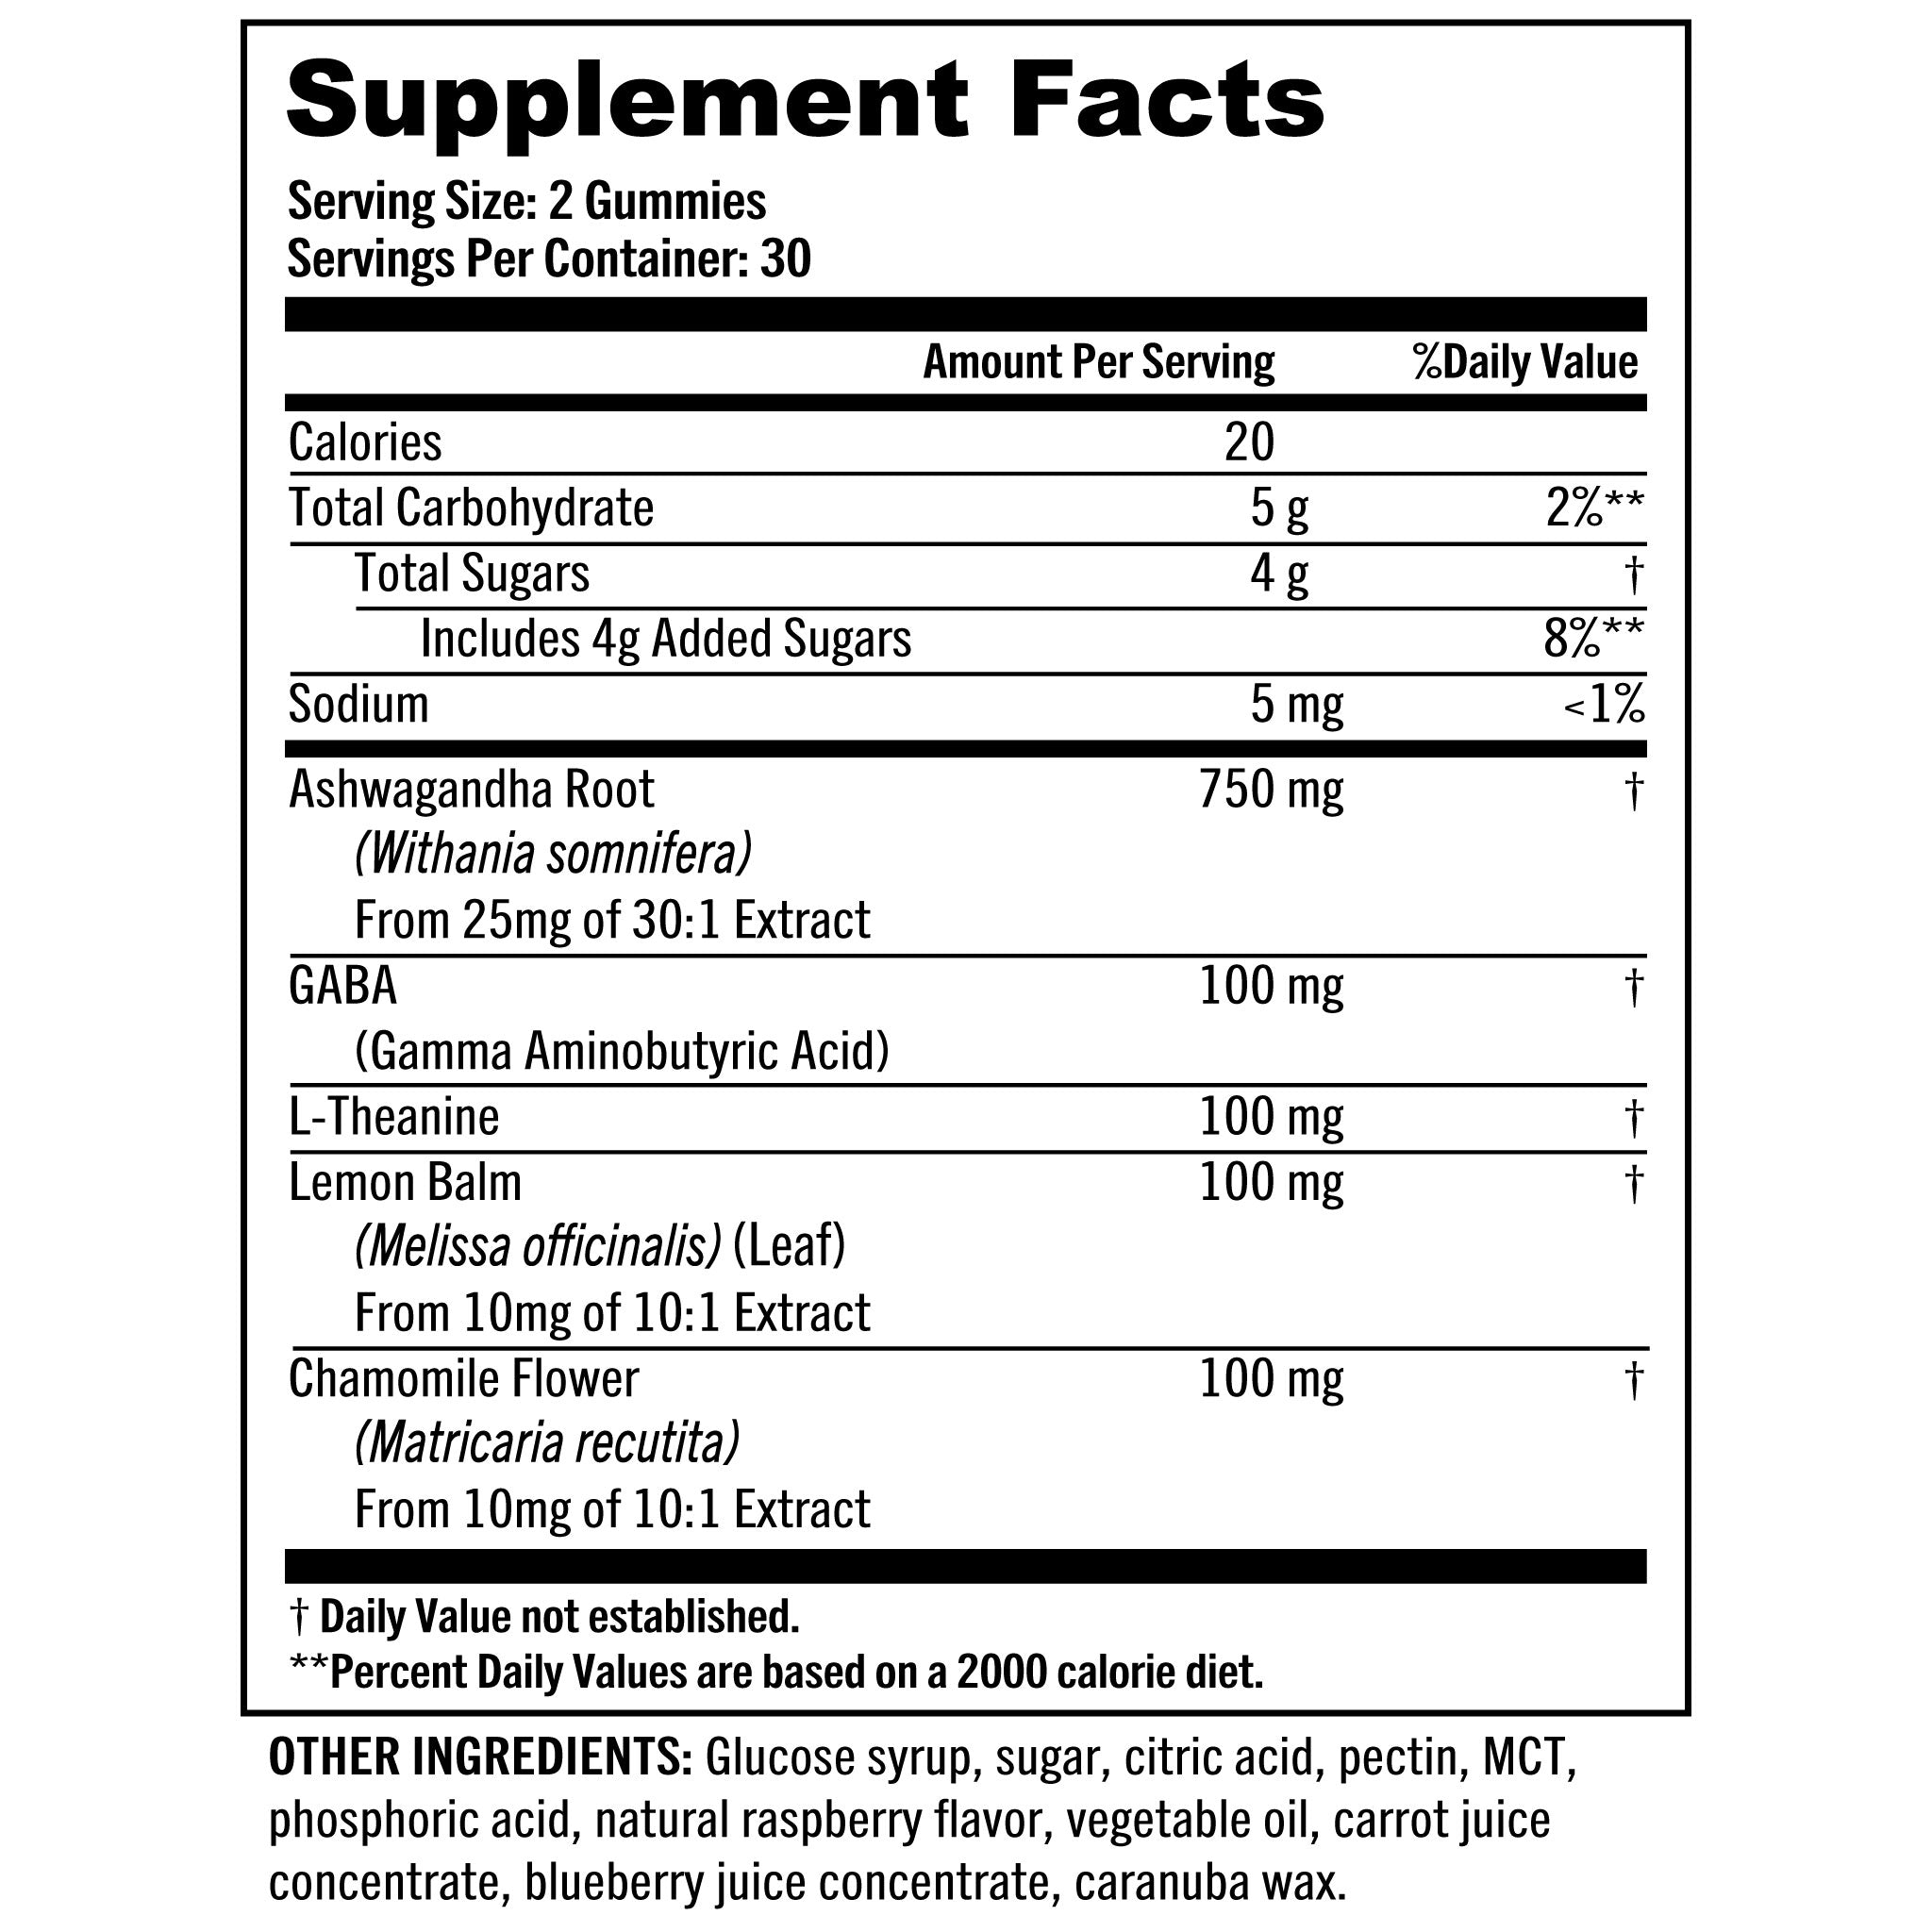 Supplement Facts Panel Image